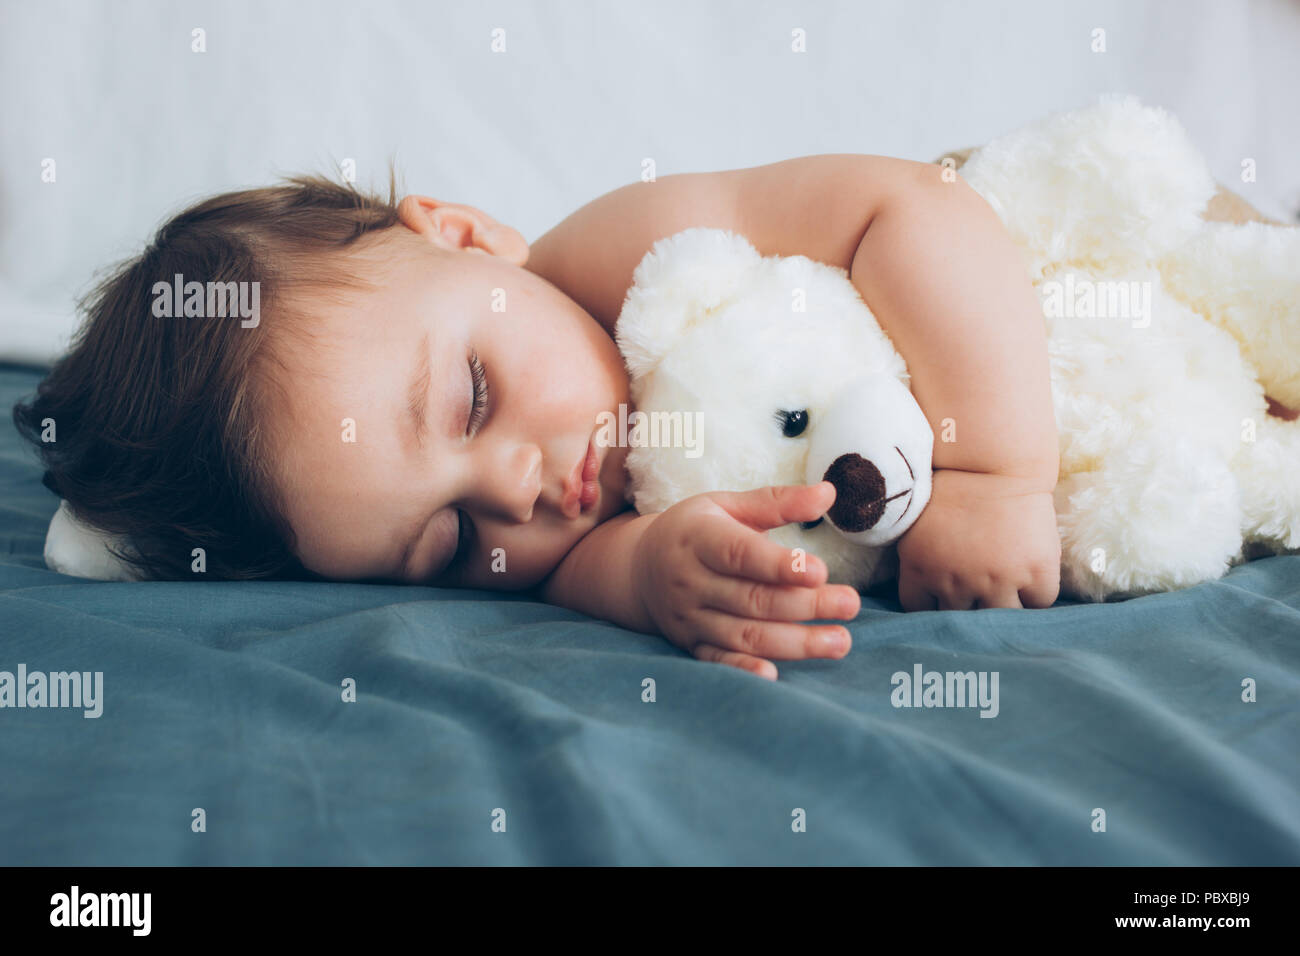 Beautiful baby sleeping with his teddy bear aside, family concept Stock Photo